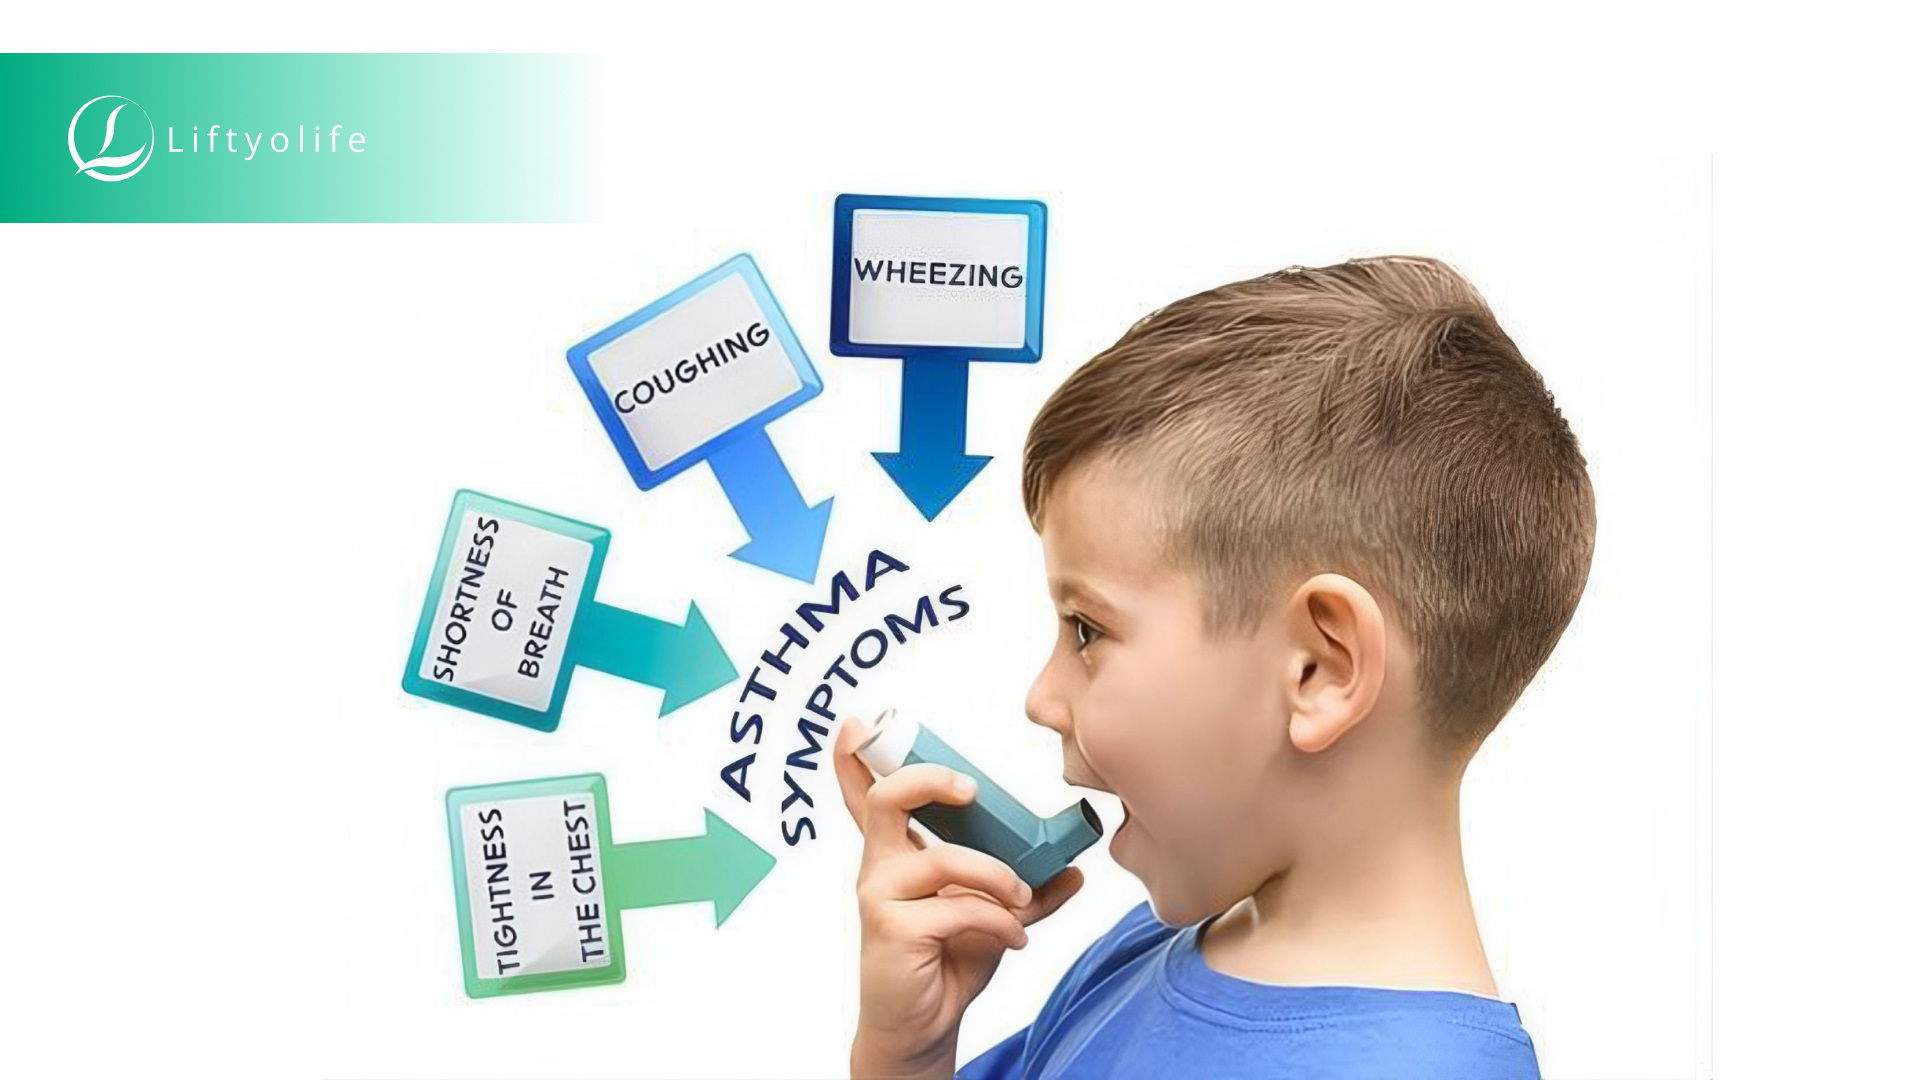 What are the symptoms of asthma?